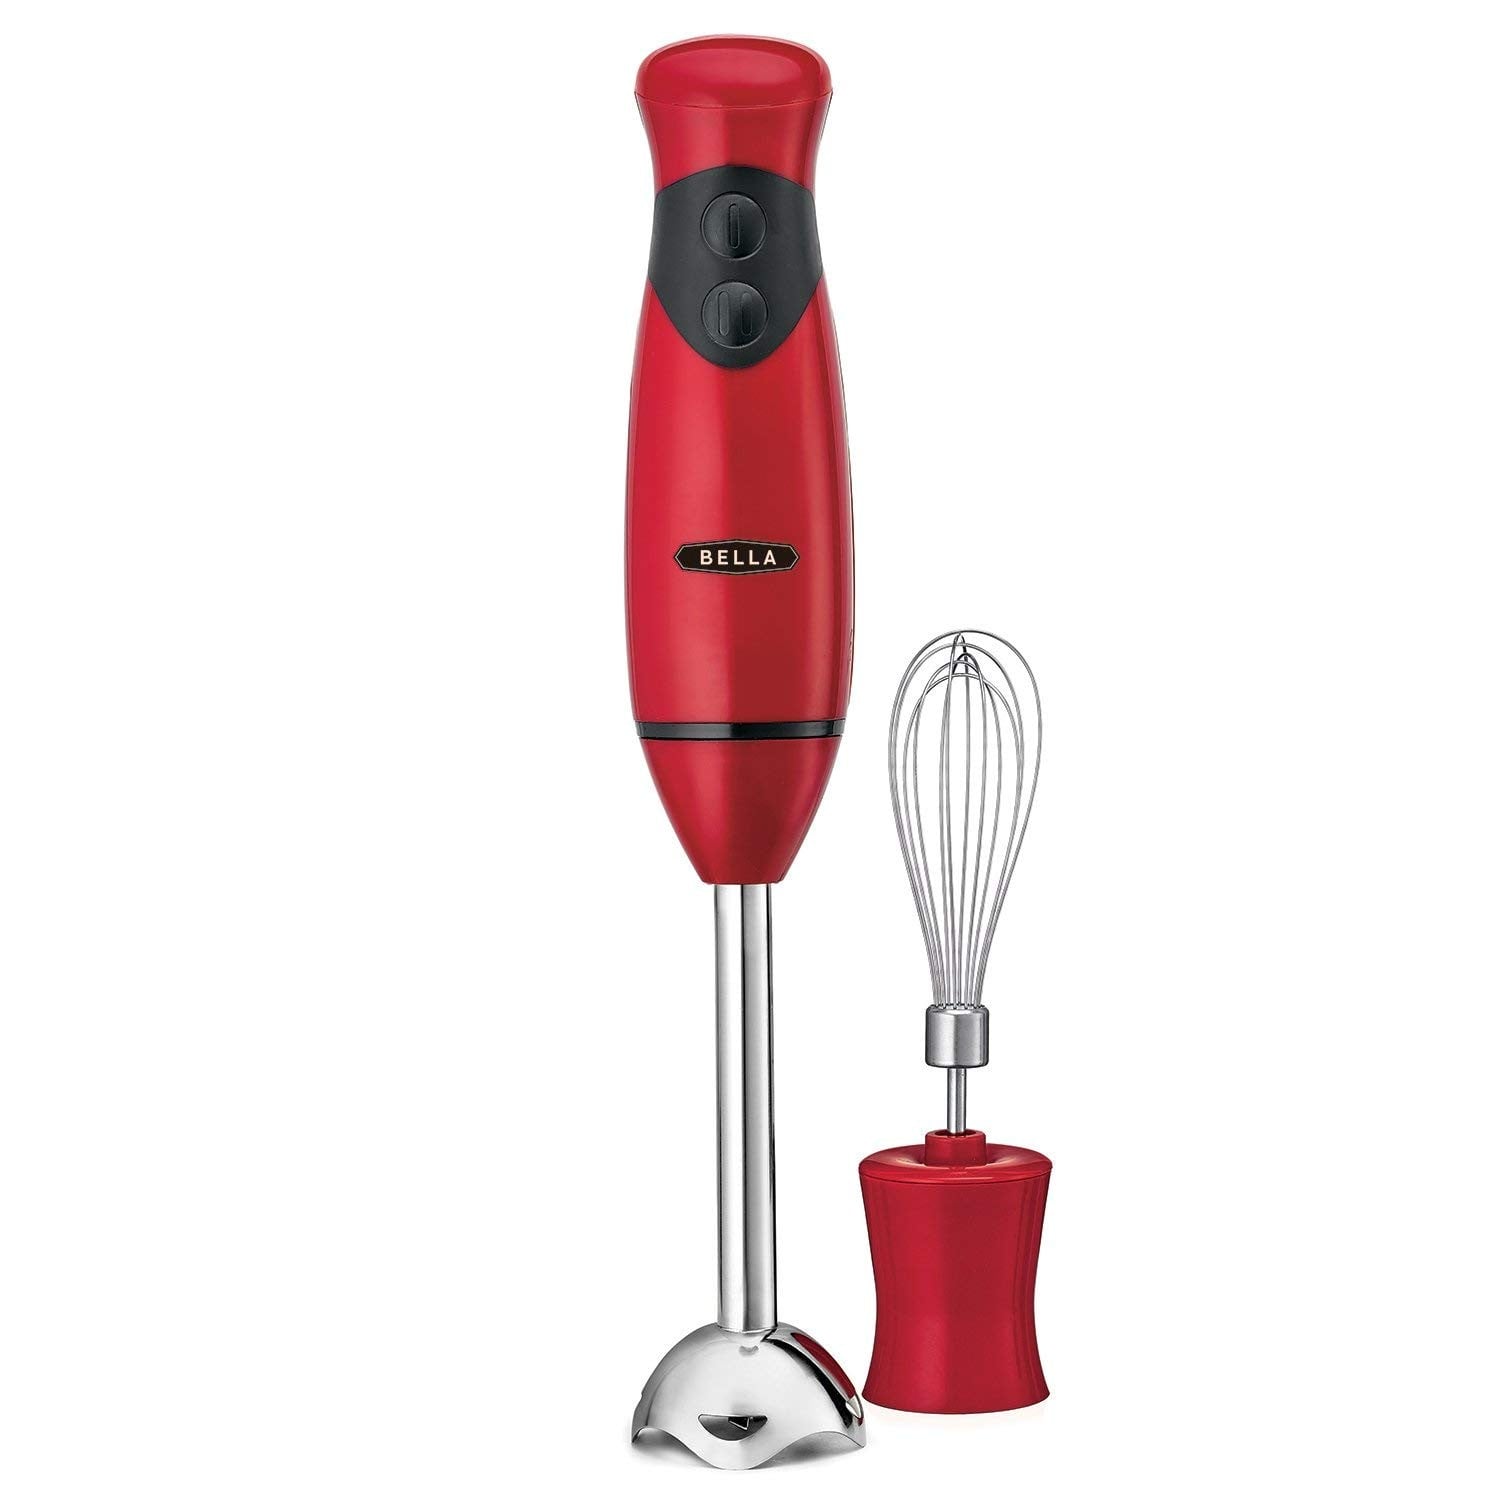 Mueller Smart Stick 800W Immersion Blender Review: The Ultimate